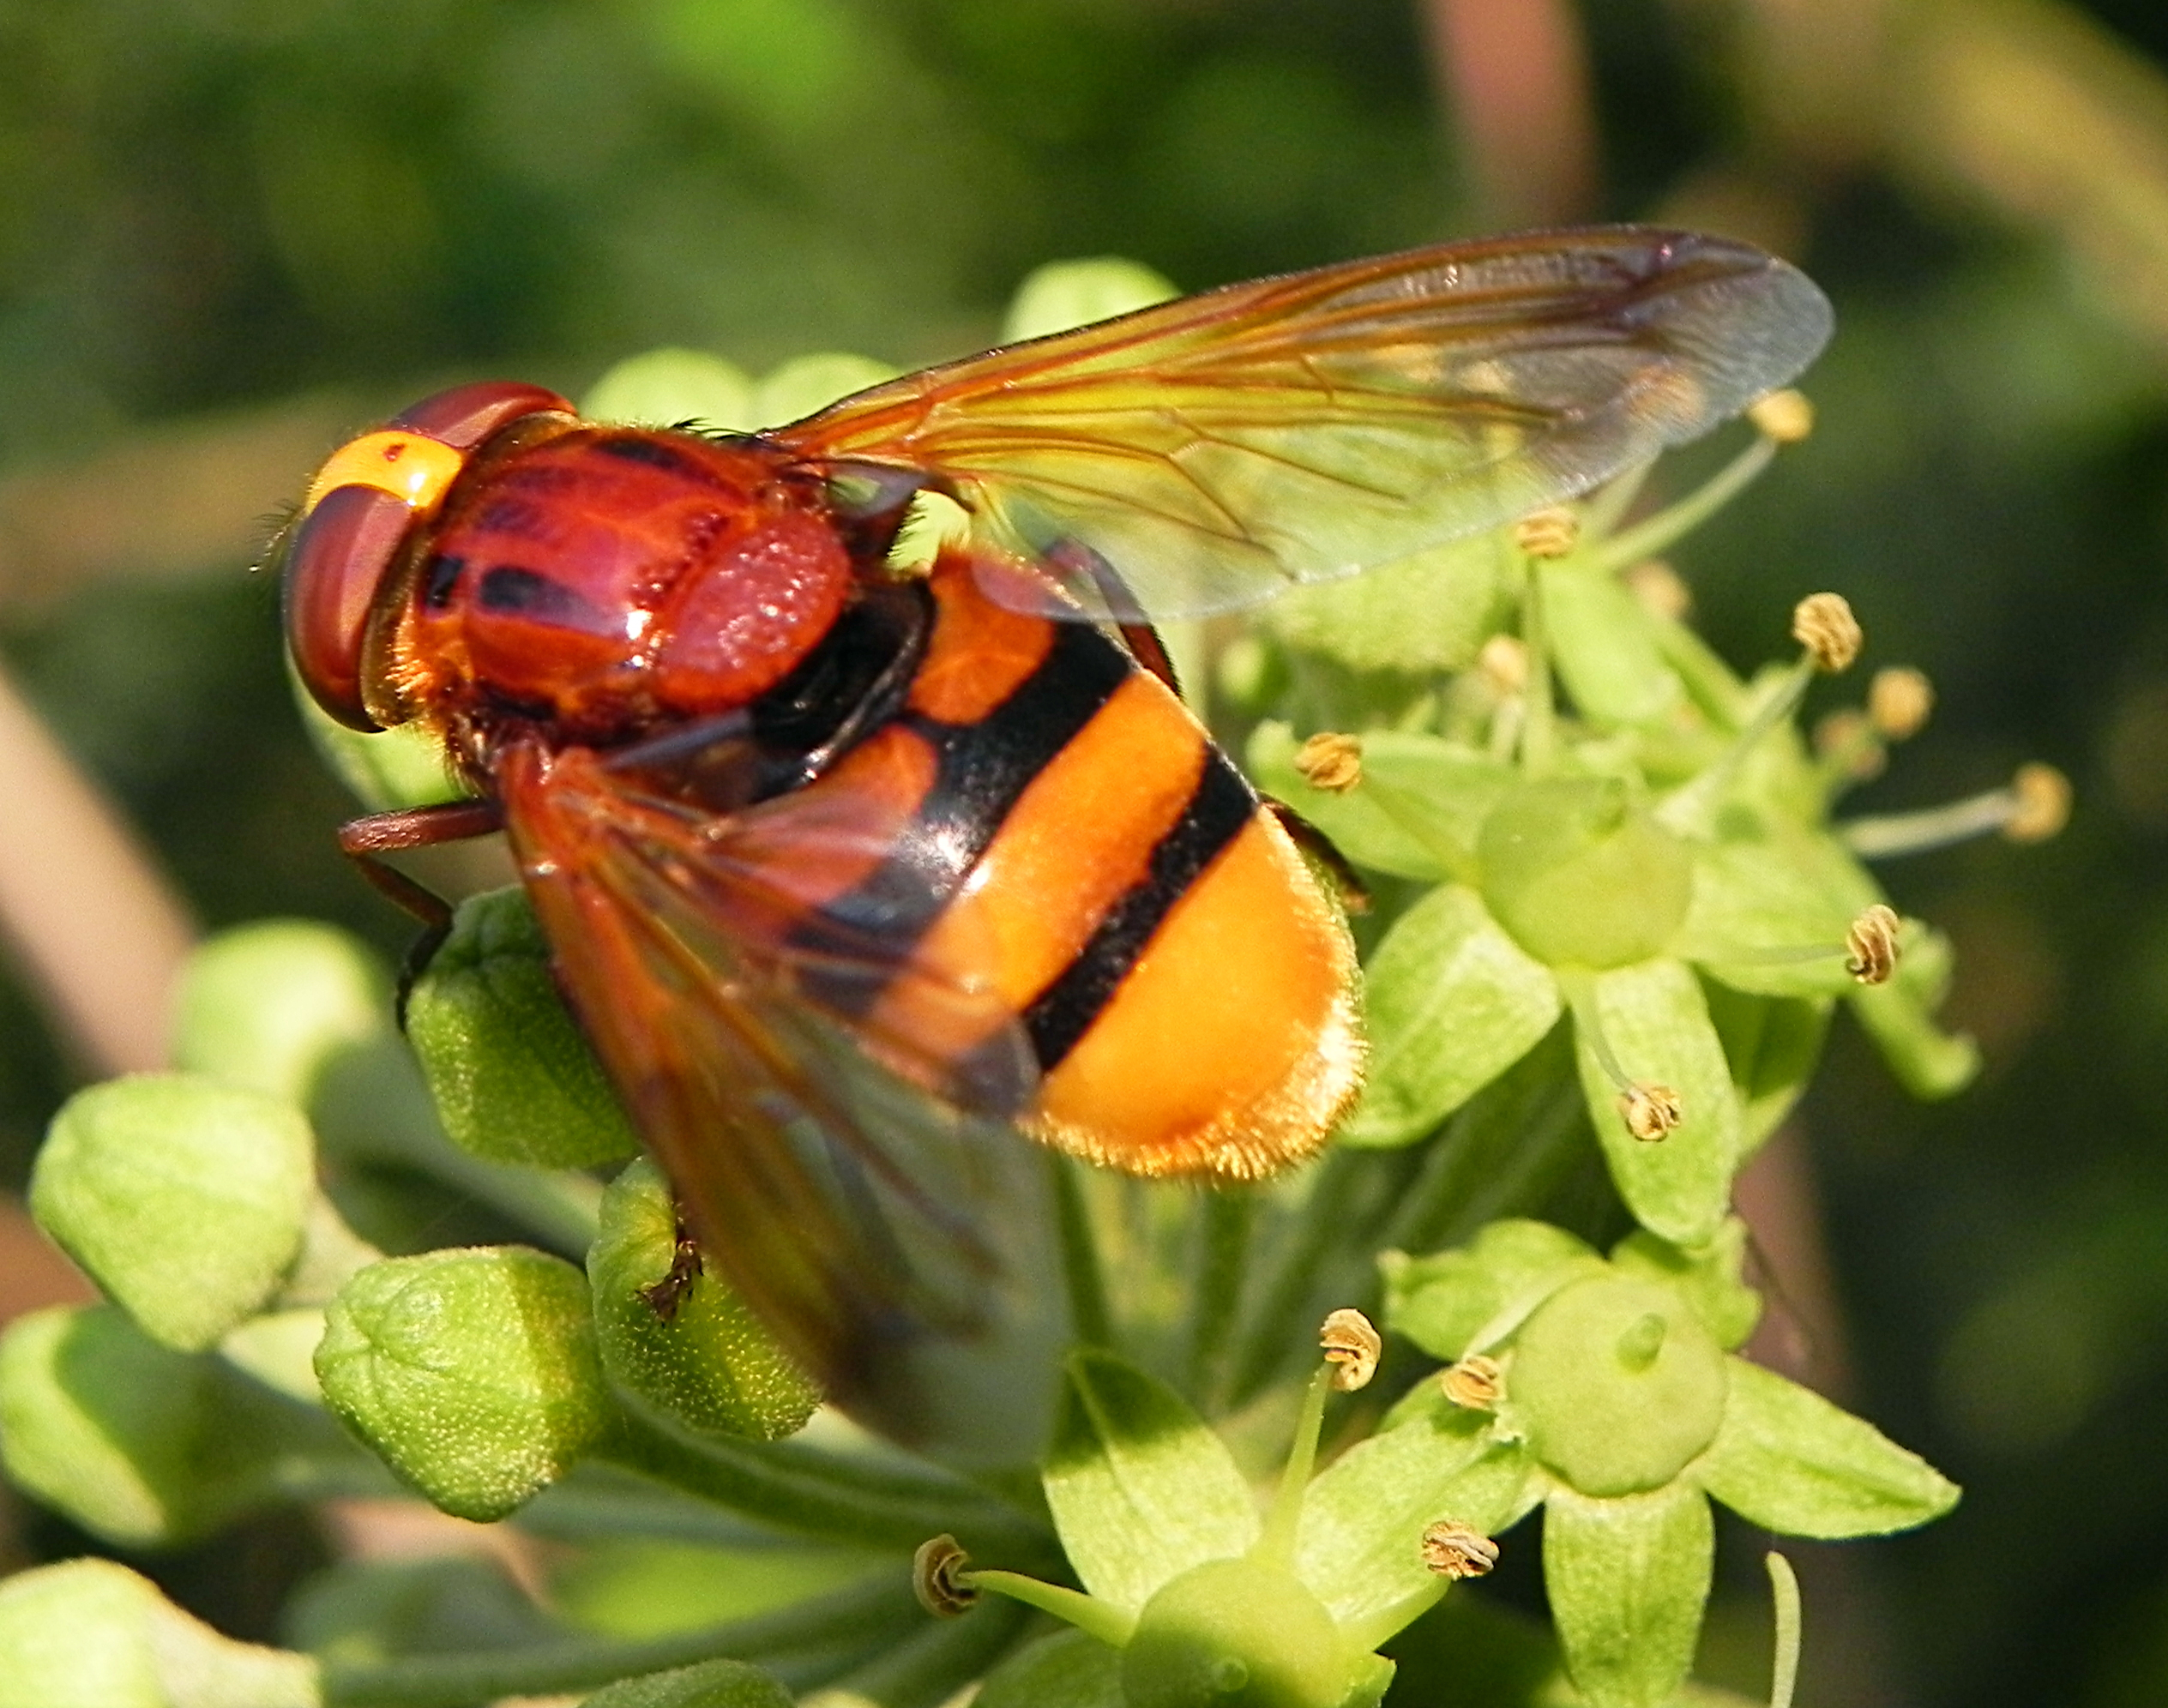 Fam. Syrphidae, Italia, Brescia, 23 Aug 2014. Provided by Paolo to children for didactics, but not shot with them.